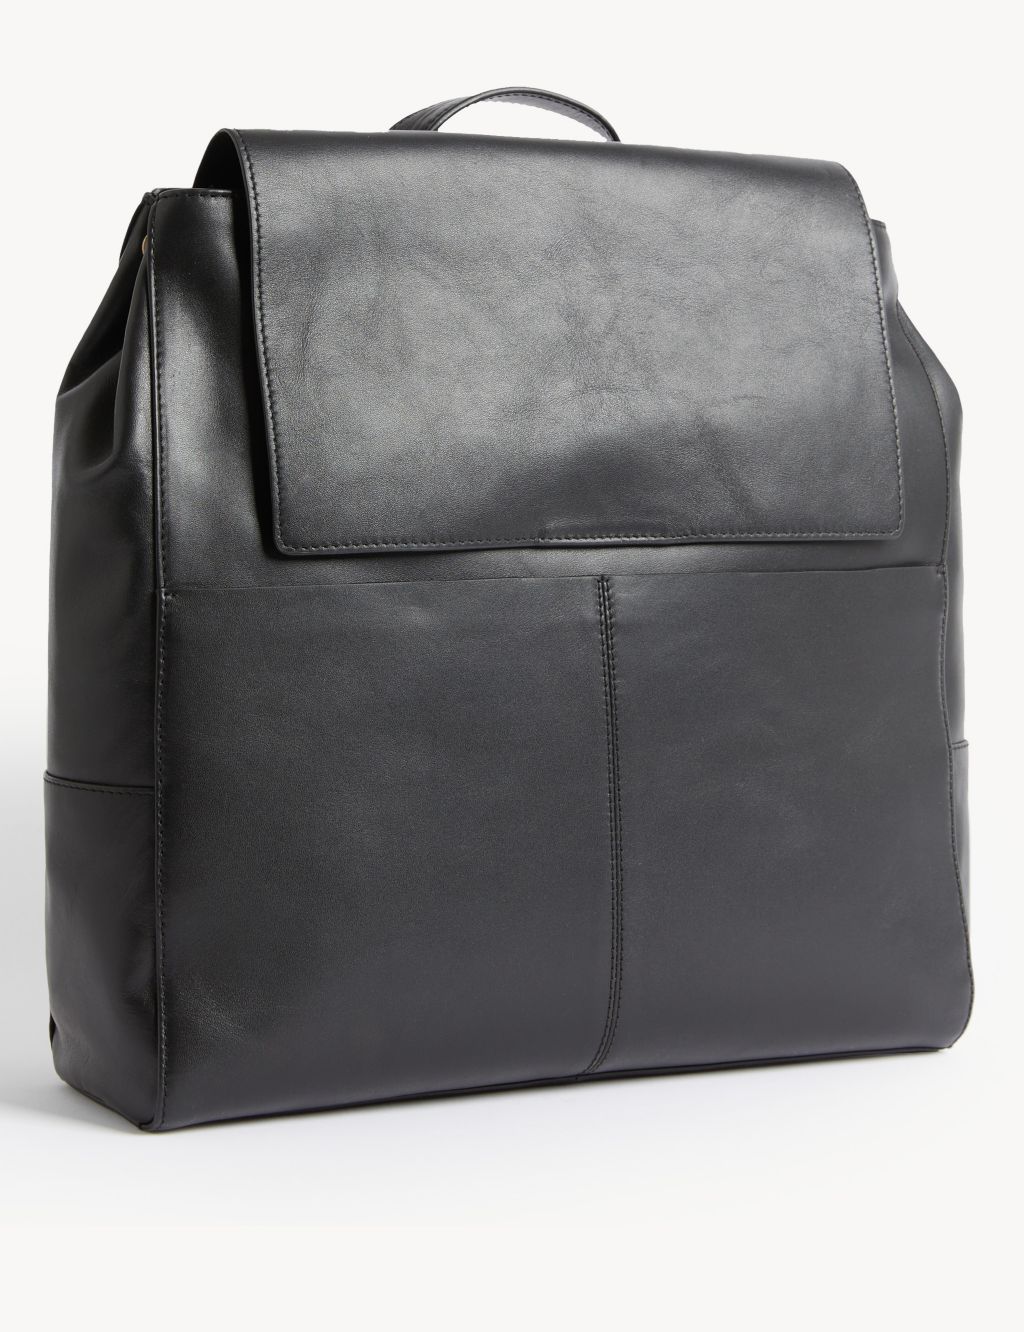 Leather Top Handle Backpack image 1